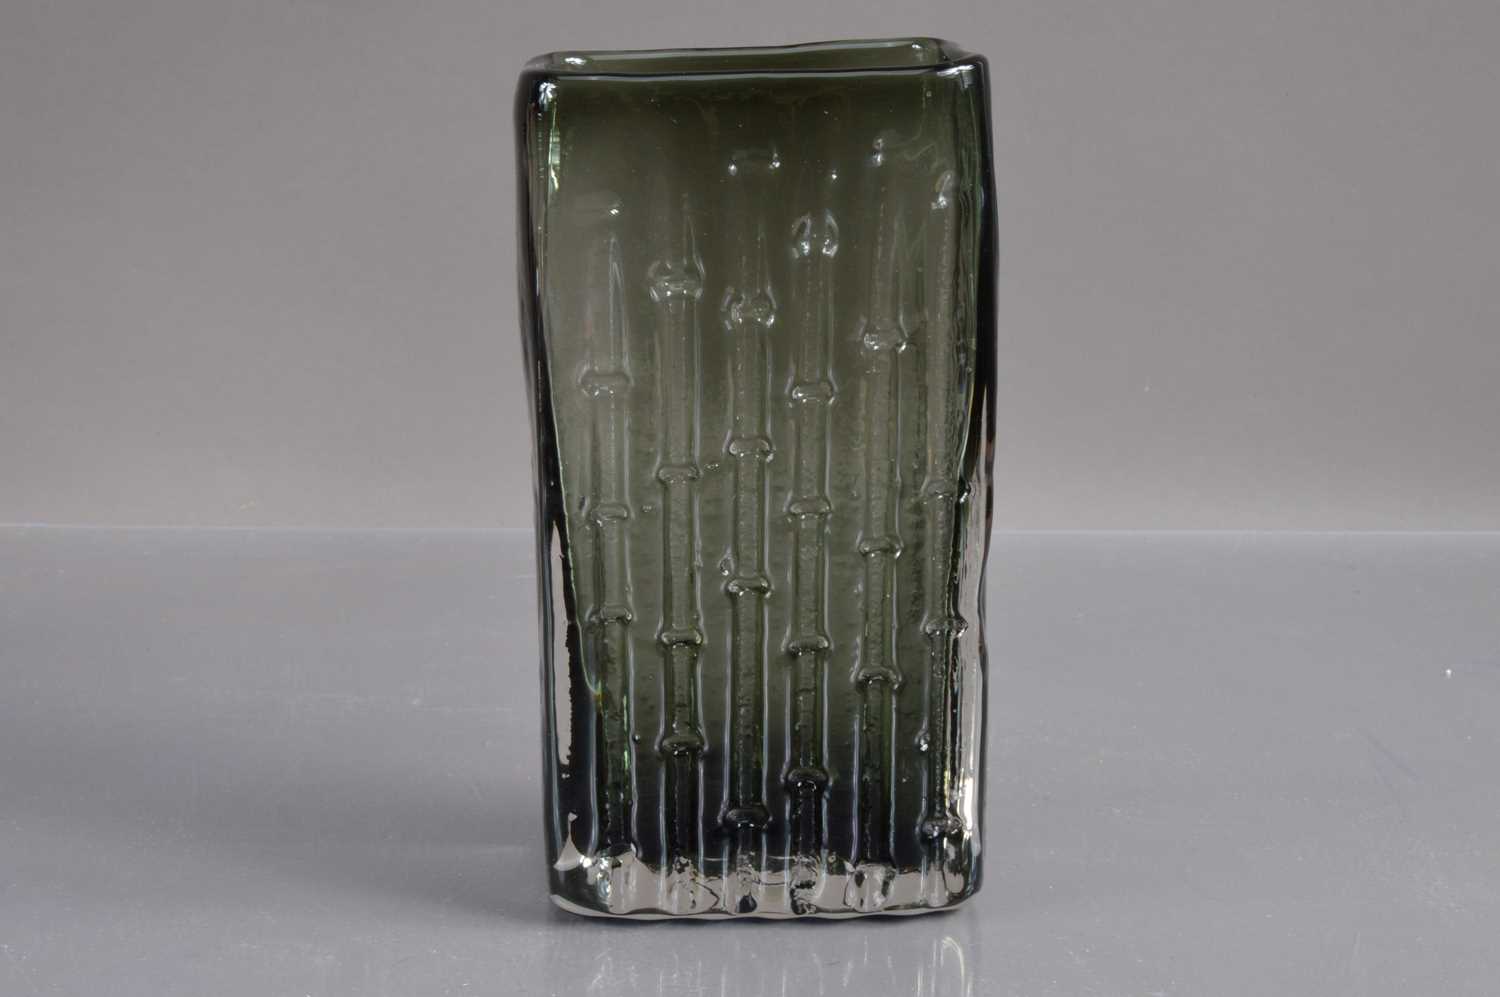 A Whitefriars bamboo vase in 'Willow' colourway designed by Geoffrey Baxter (1922-1995),